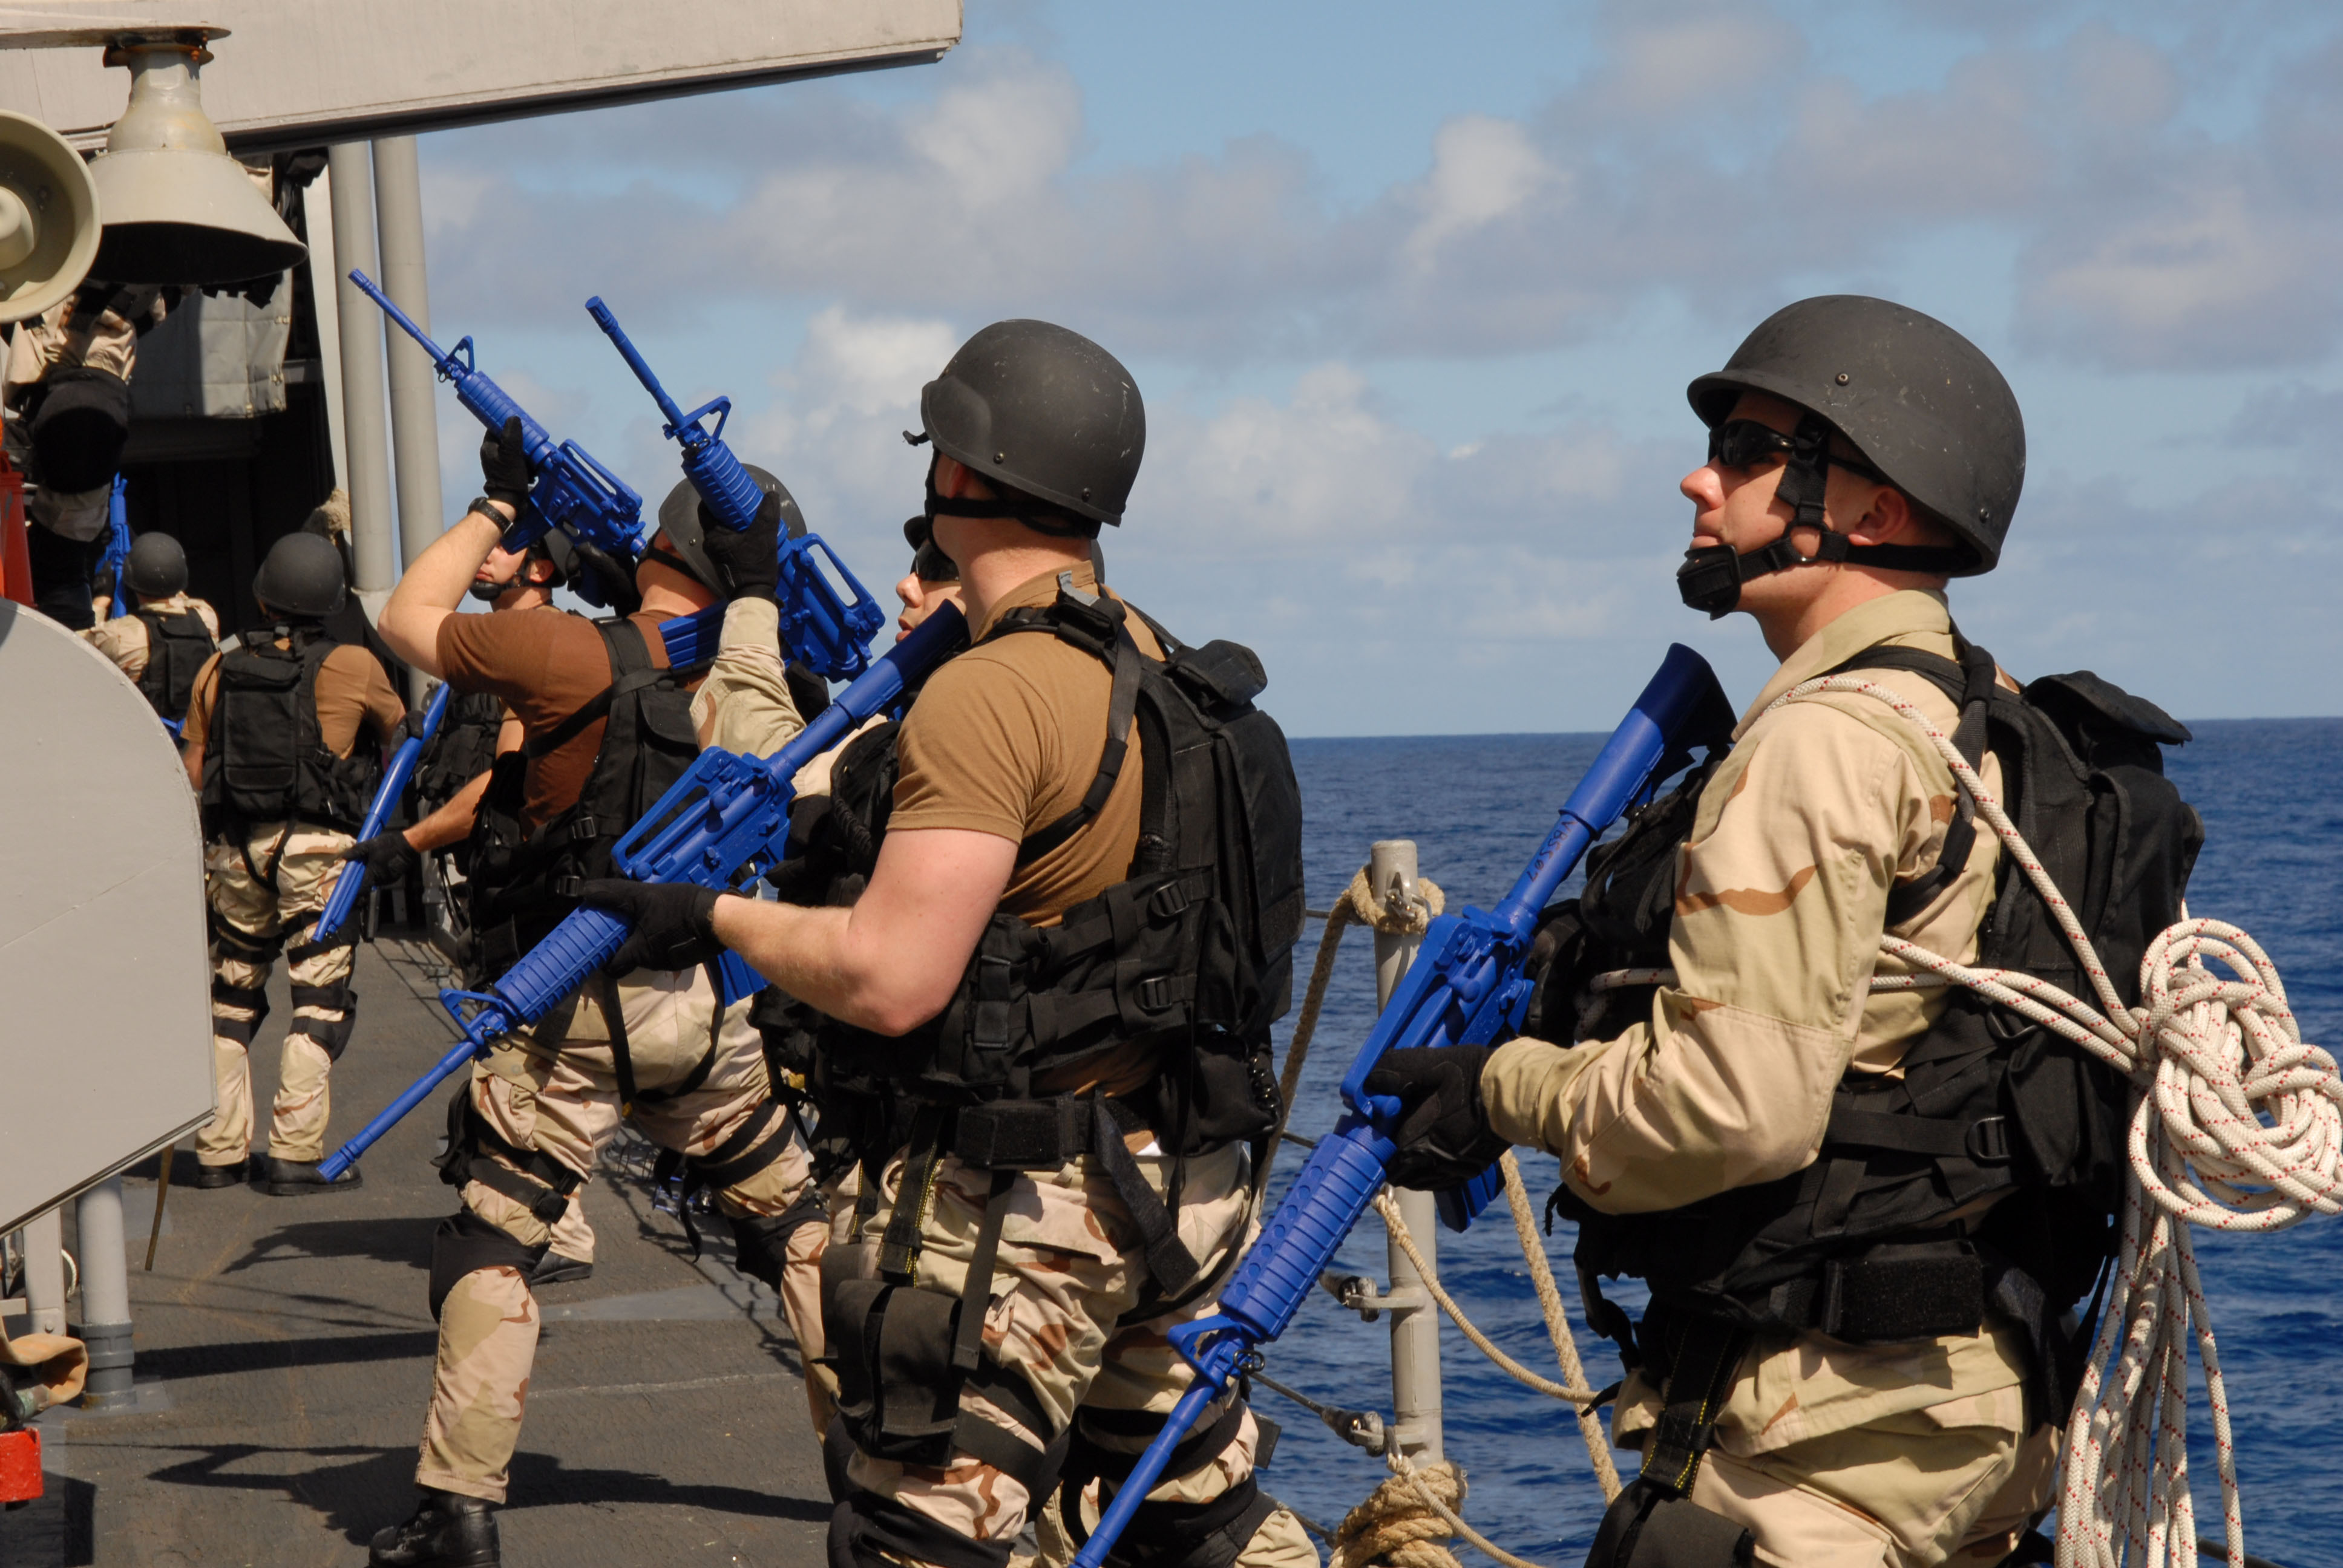 us_navy_070416-n-2735t-277_sailors_assigned_to_the_visit_board_search_and_seizure_vbss_team_aboard_guided_missile_destroyer_uss_bainbridge_ddg_96_perform_training_evolutions_aboard.jpg